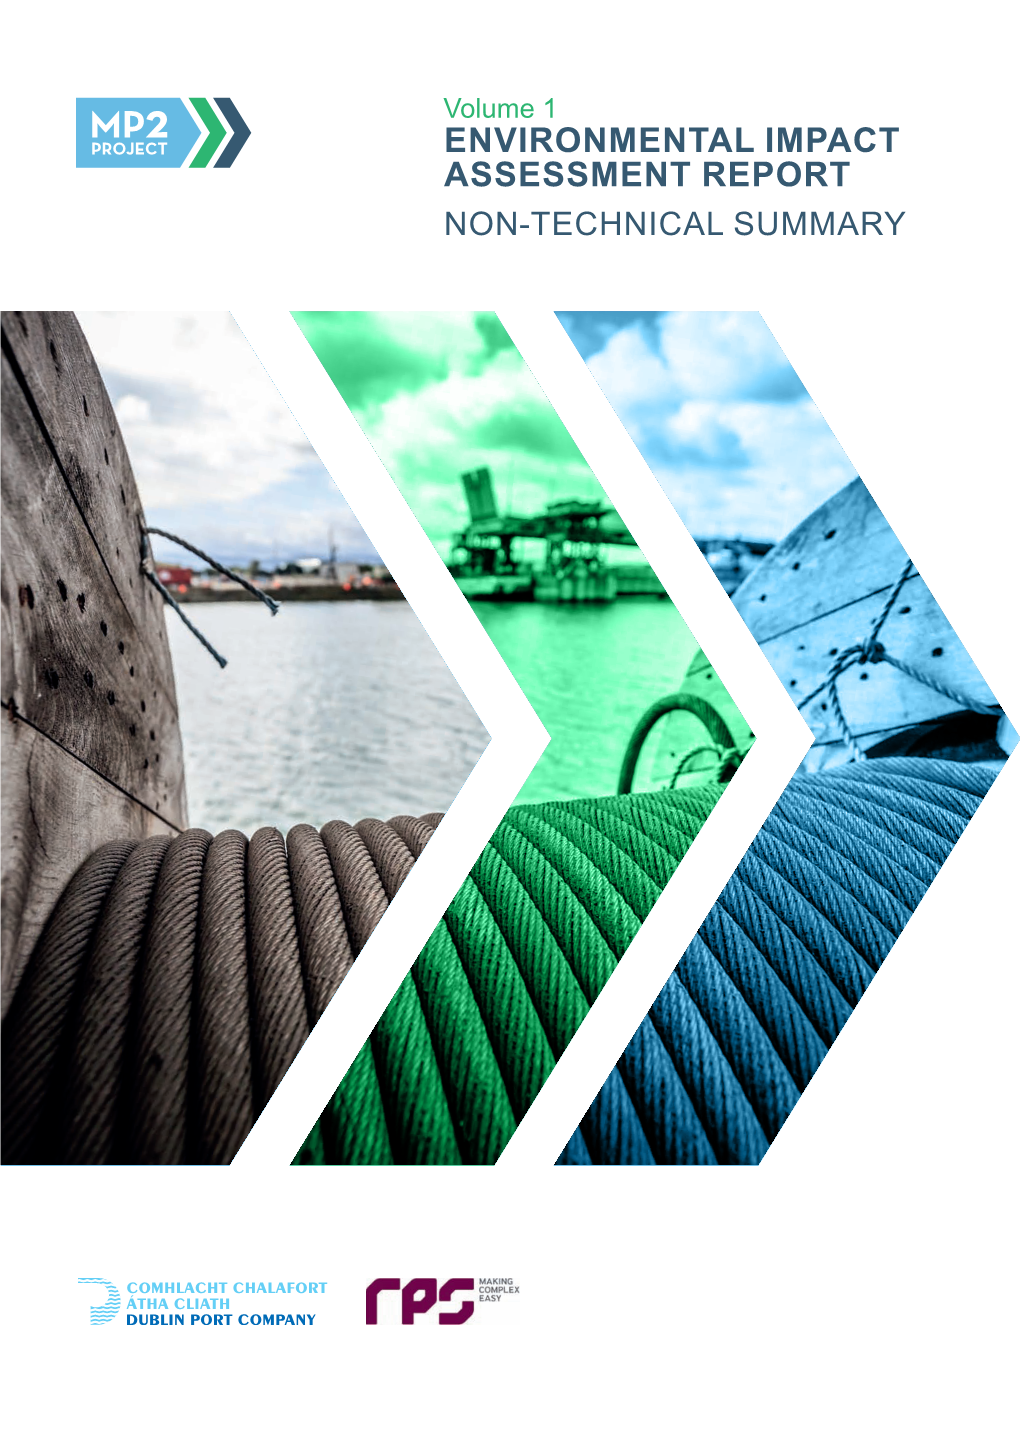 Environmental Impact Assessment Report Non-Technical Summary